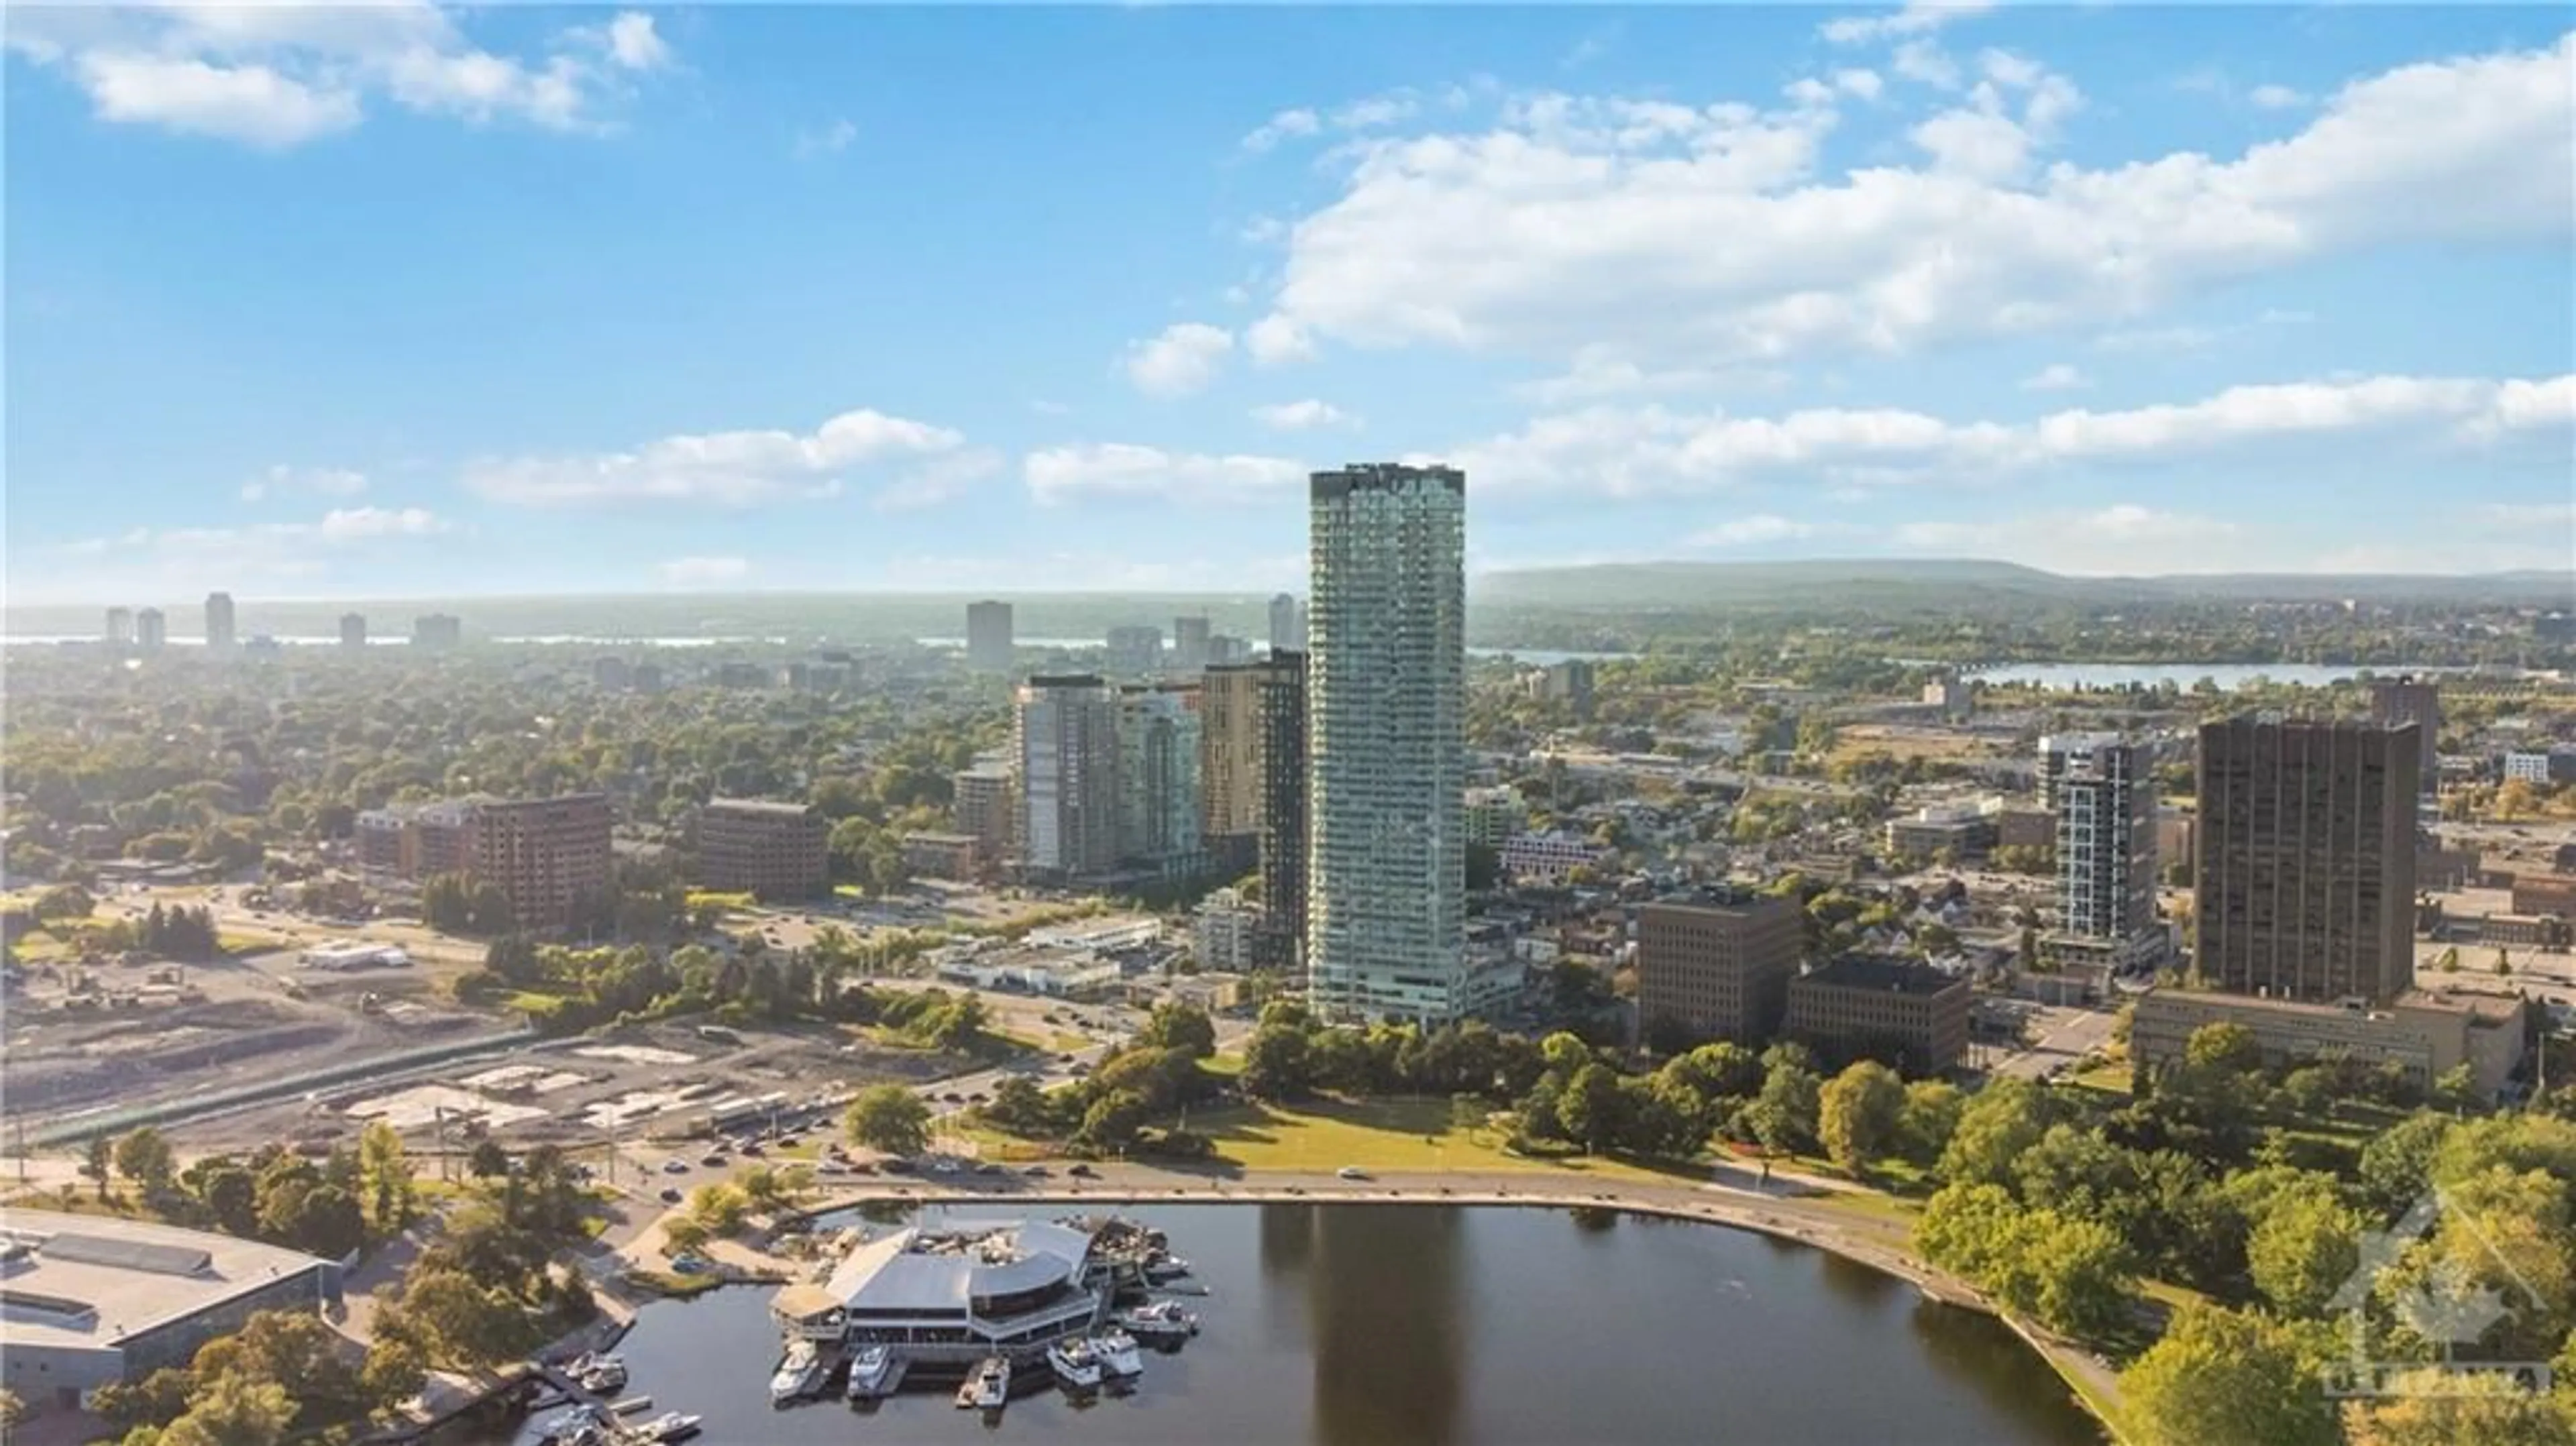 Lakeview for 805 CARLING Ave #4502, Ottawa Ontario K1S 5W9